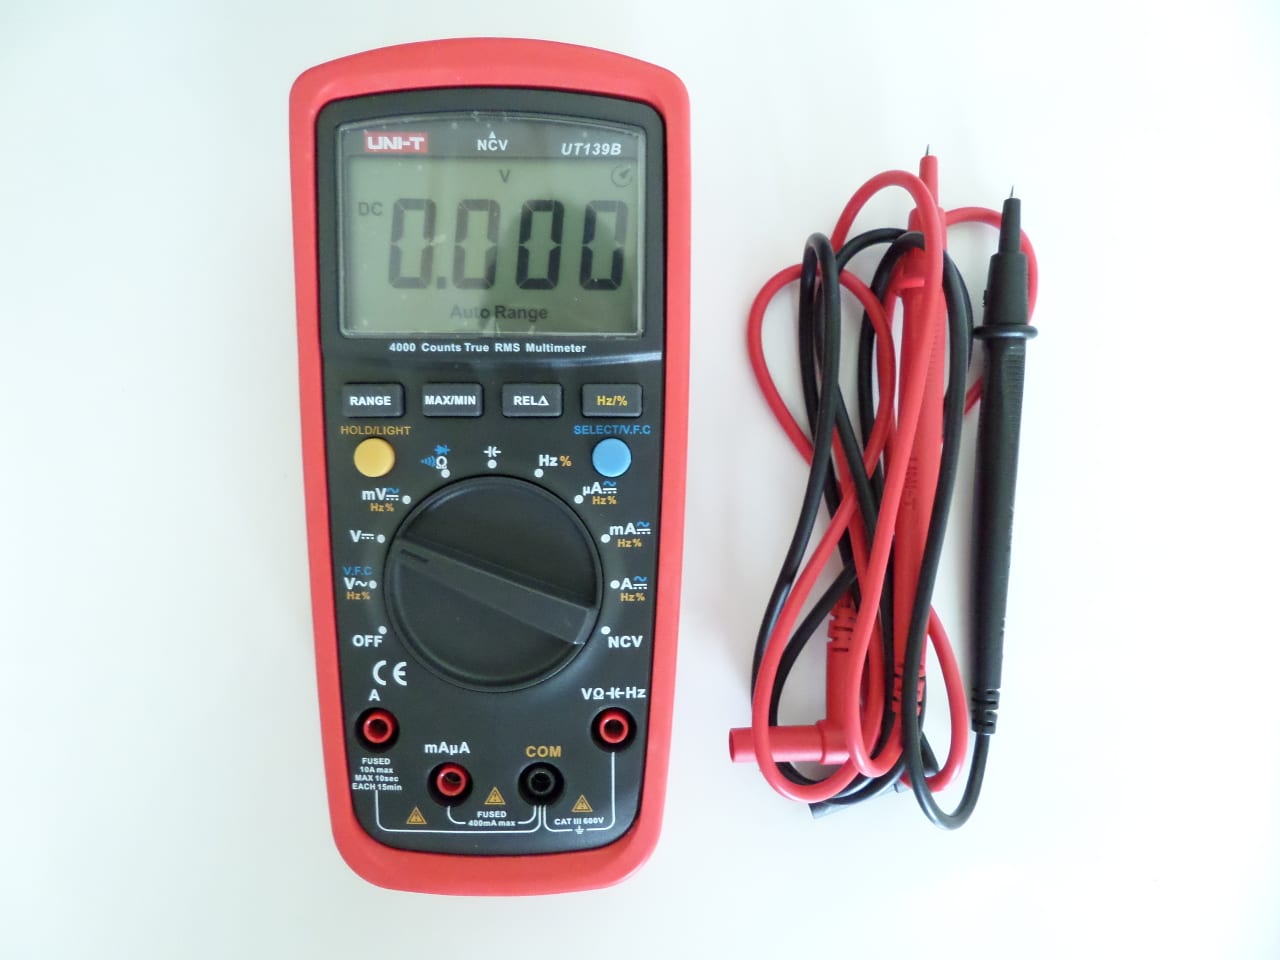 The Uni-T UT139, a True RMS multimeter with 4000 counts.